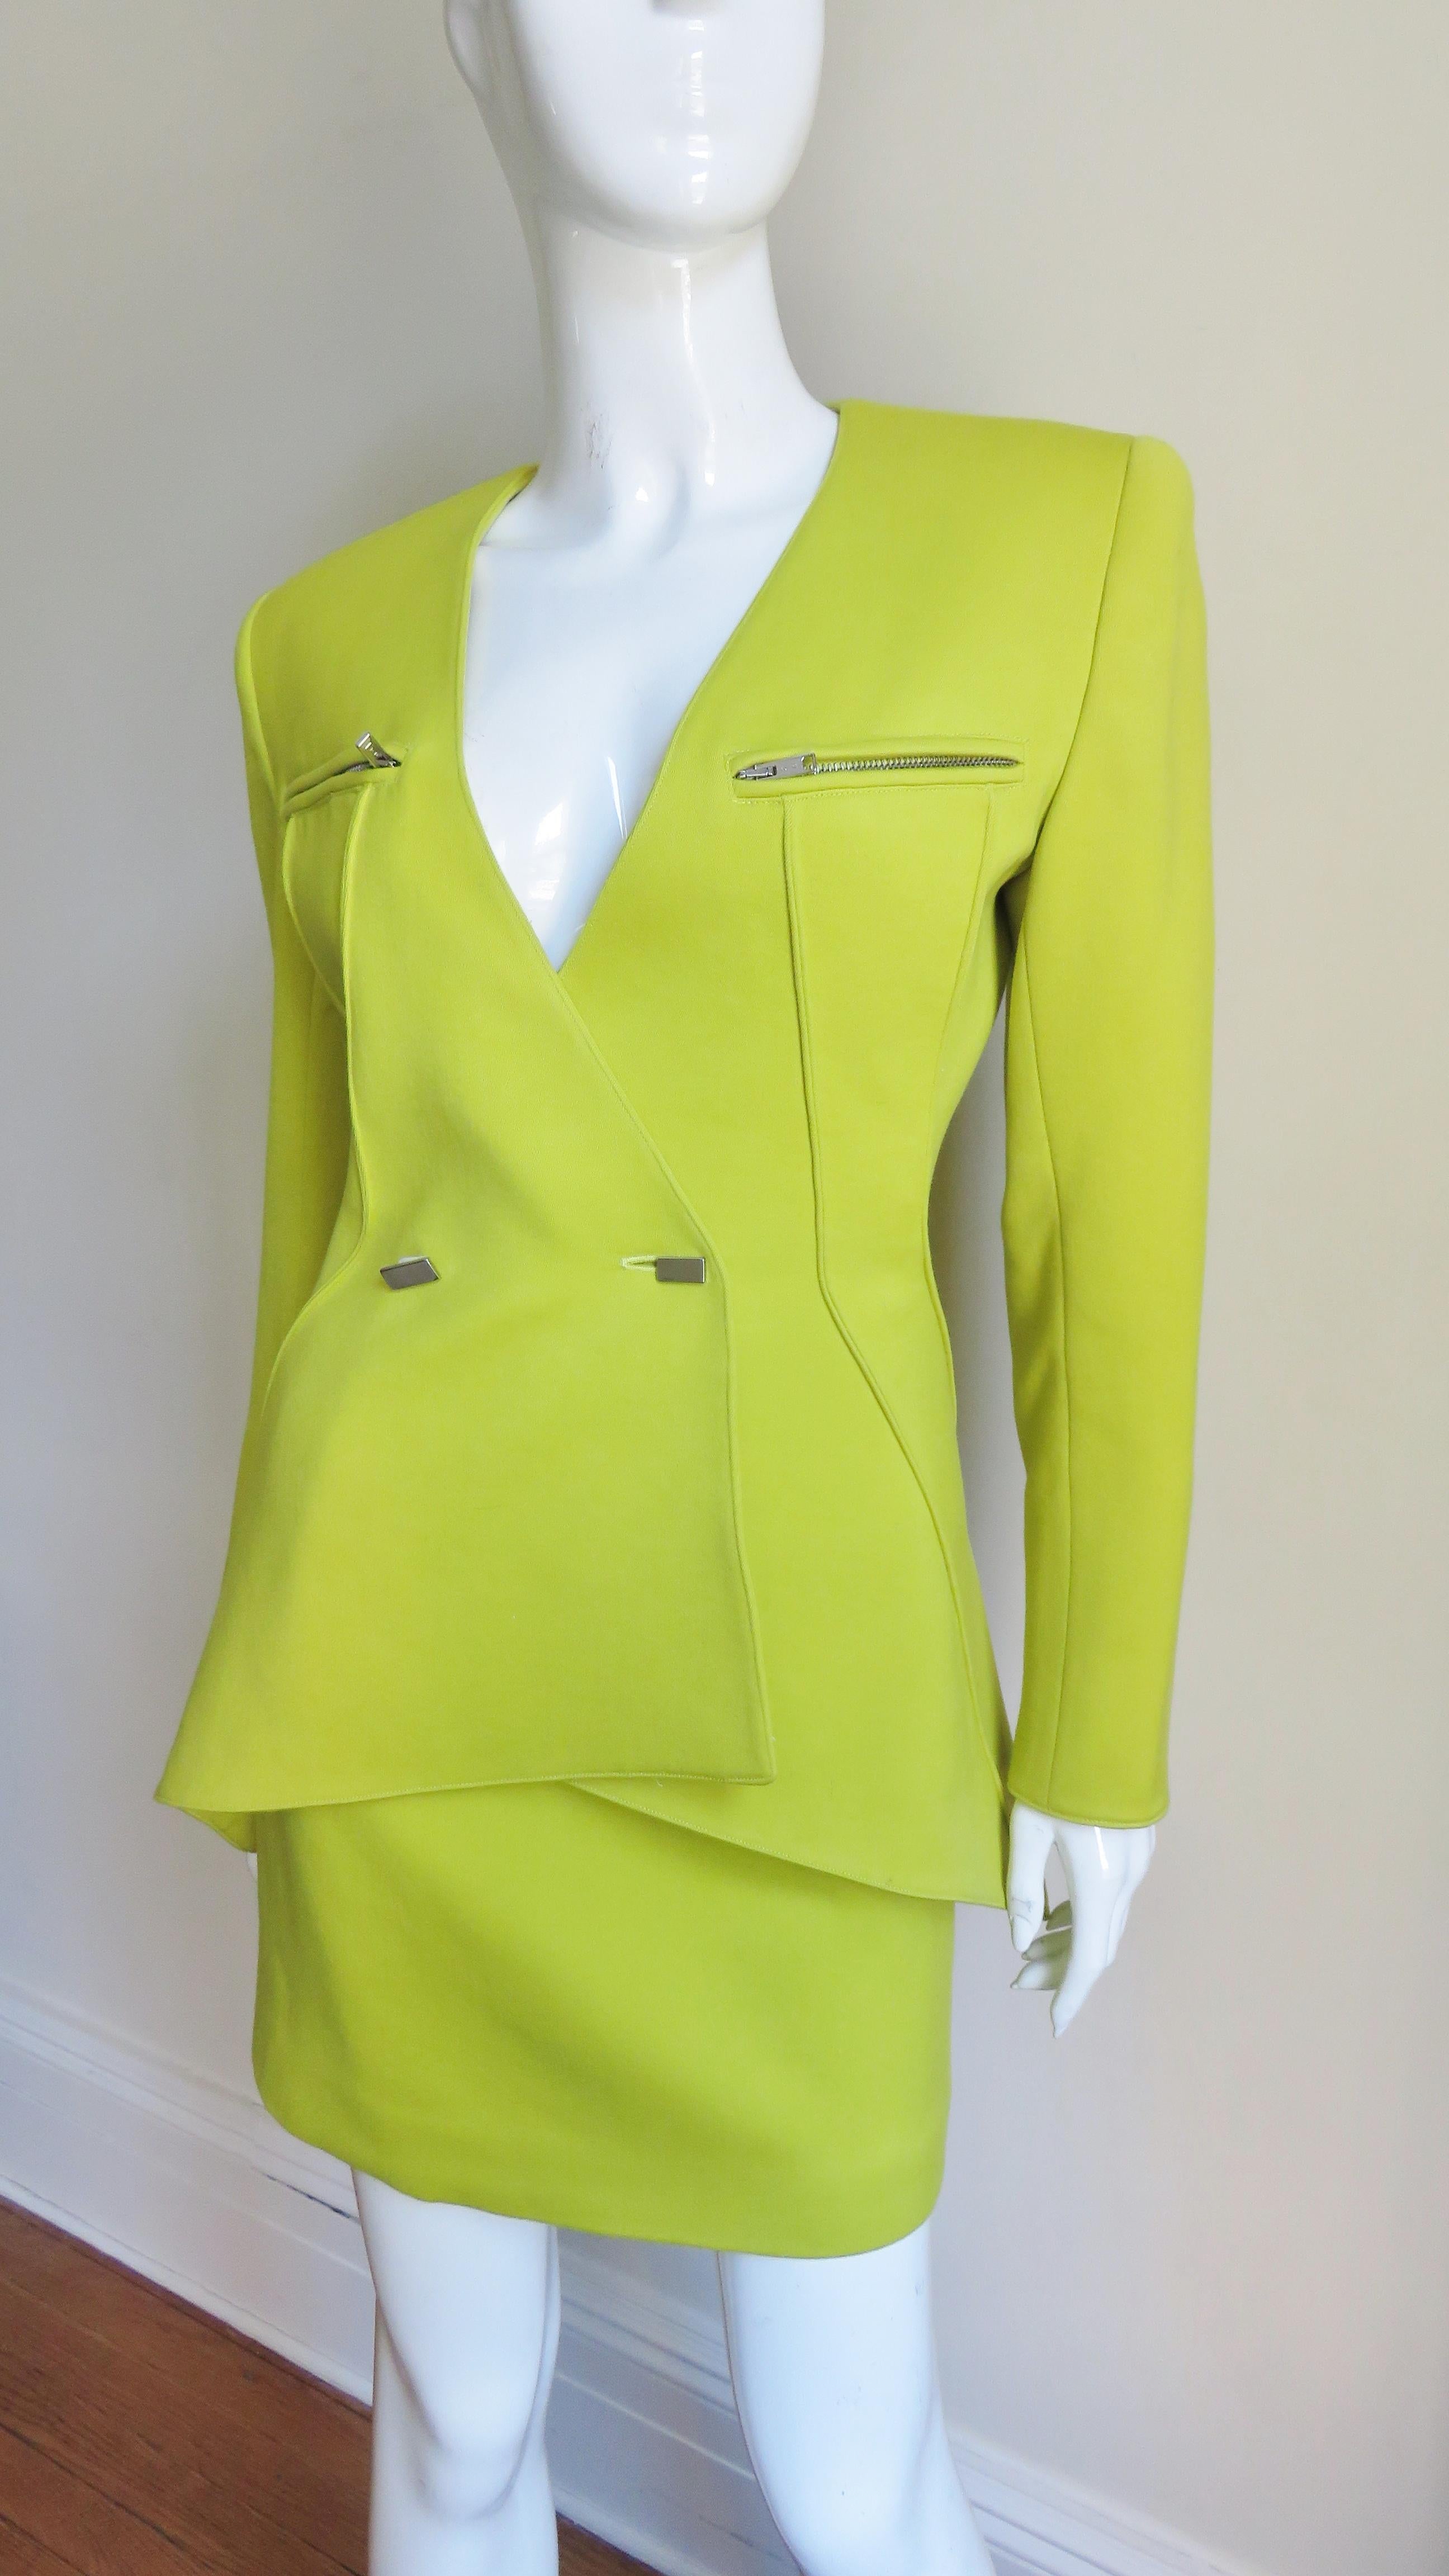 A gorgeous neon yellow green wool skirt and jacket by Claude Montana. The jacket has angled vertical seaming wrapping around the waist to the back hemline which has a slight flare. It is double breasted closing with front silver metal rectangular